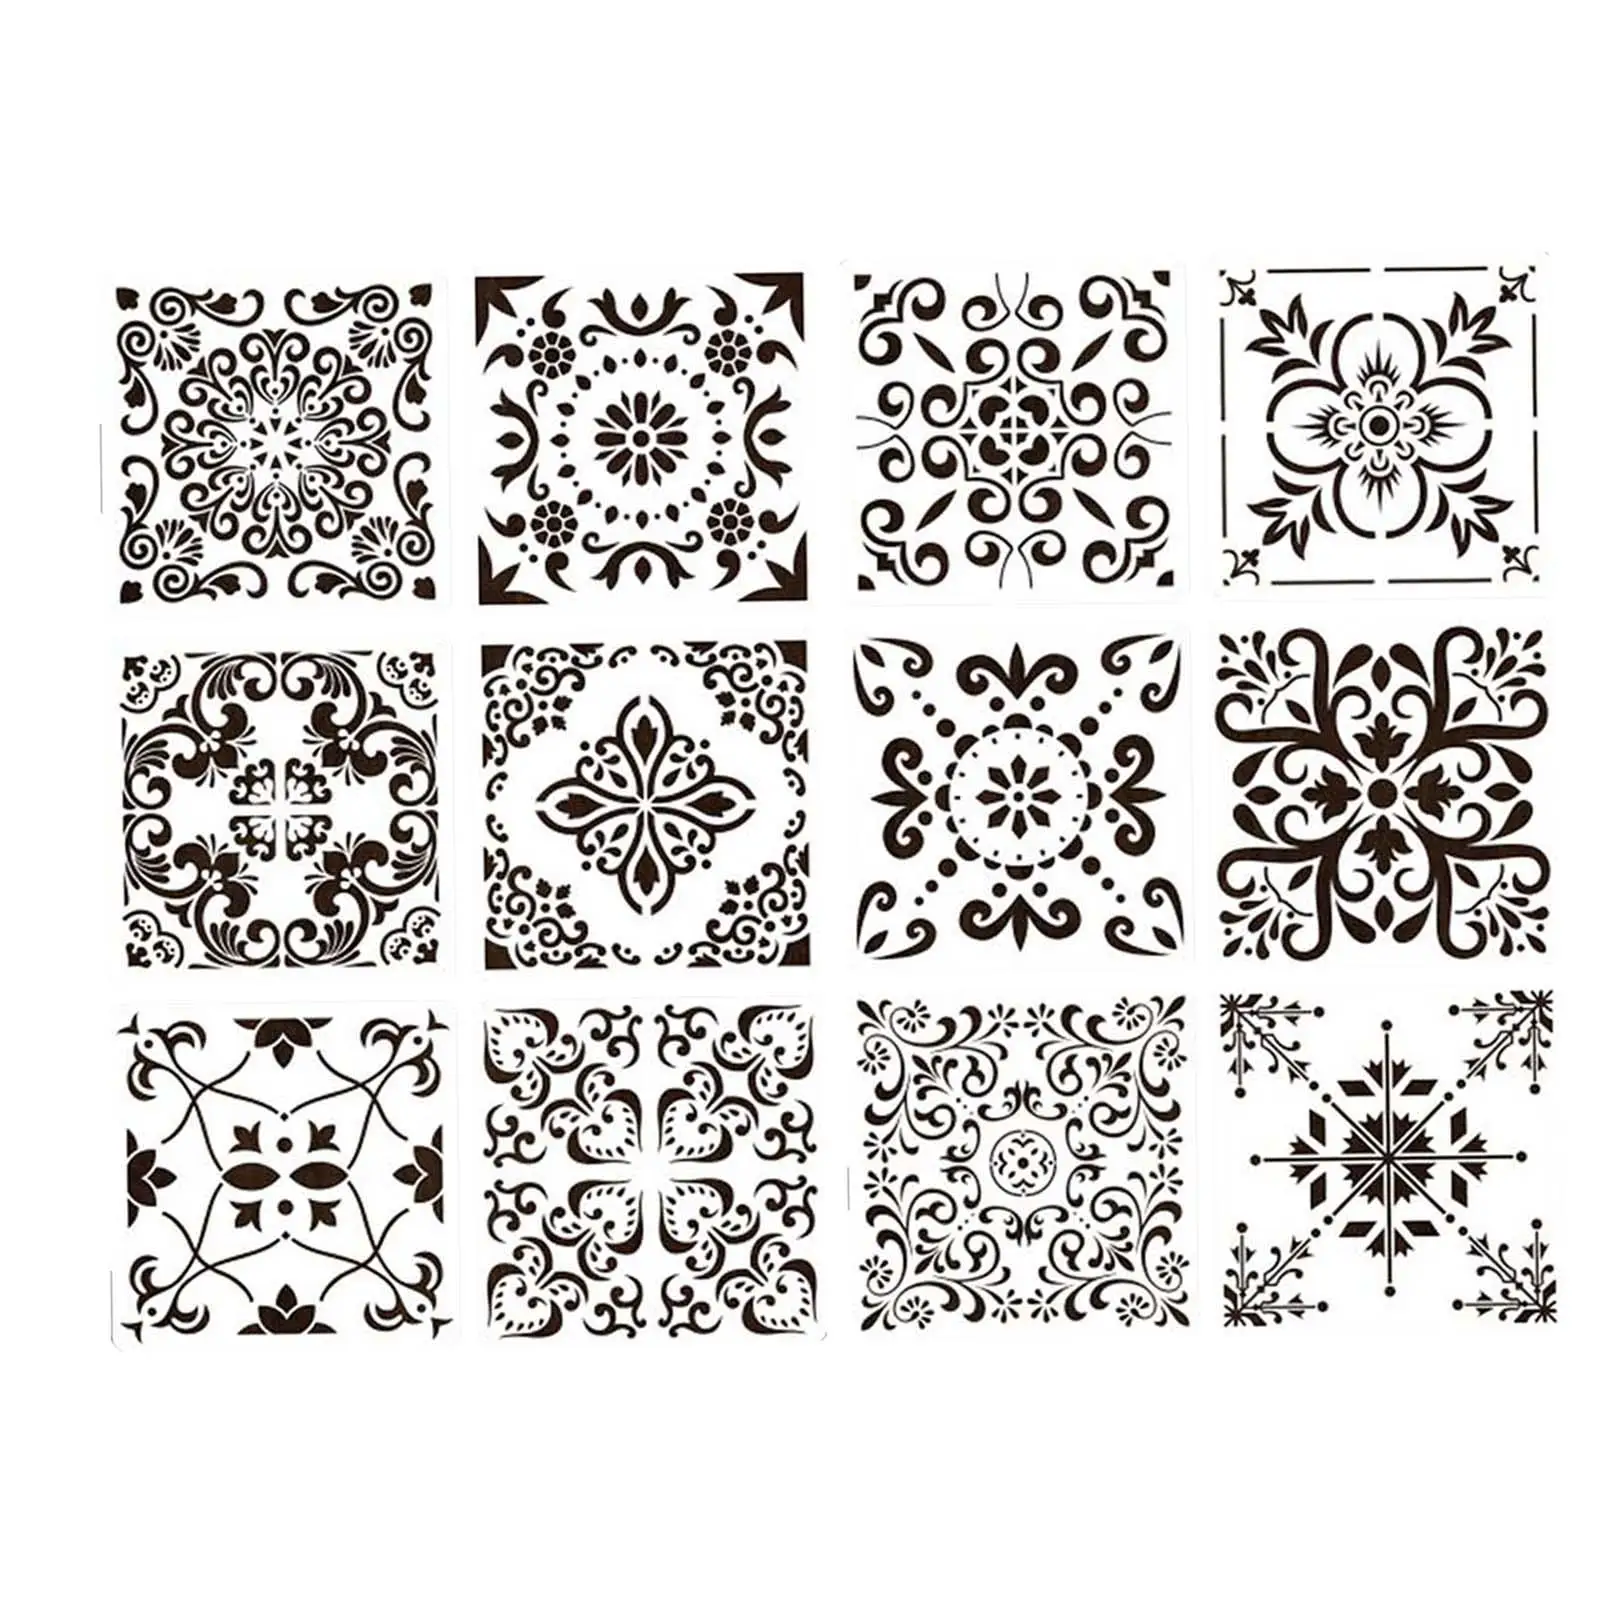 12x Mandala Stencil Template Reused Drawing Templates for Floor Furniture Walls Home